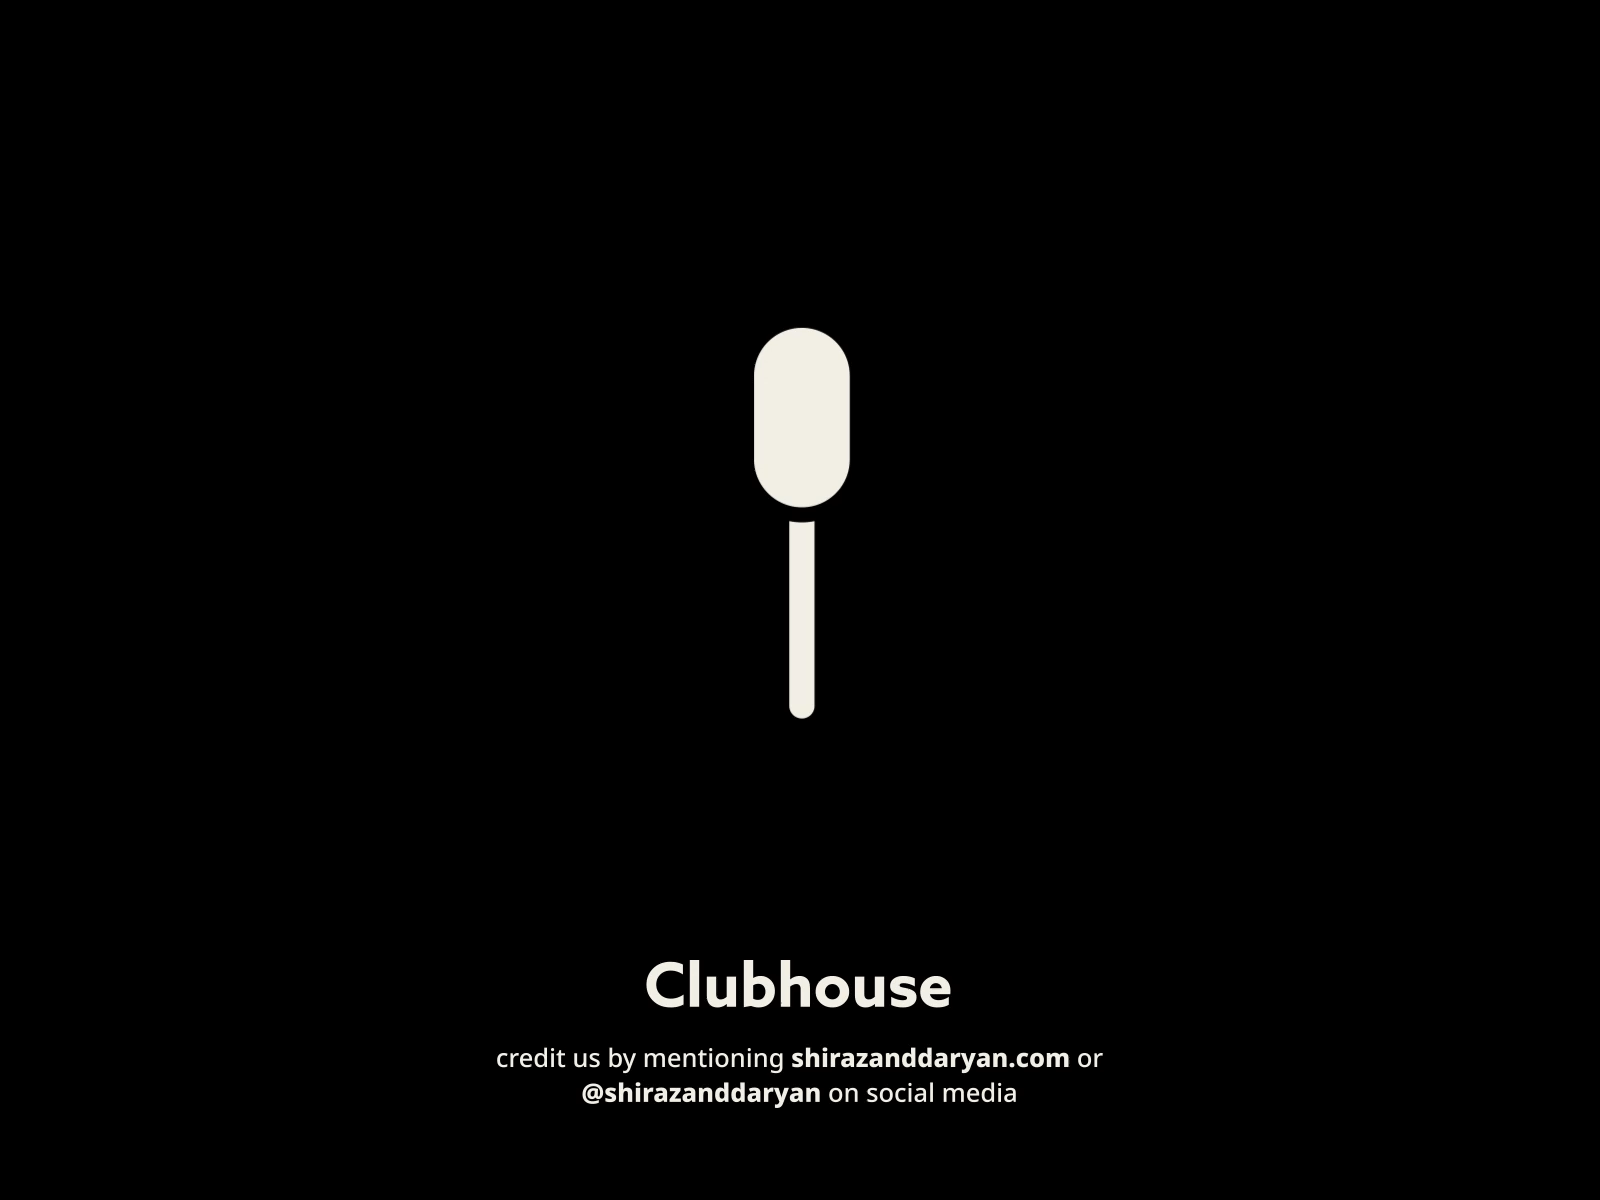 What is Clubhouse? / Clubhouse Visual Identity Concept clubhouse clubhouse 邀請 碼 clubhouseapp headphone logoconcept microphone socialmedia visual identity visualidentity